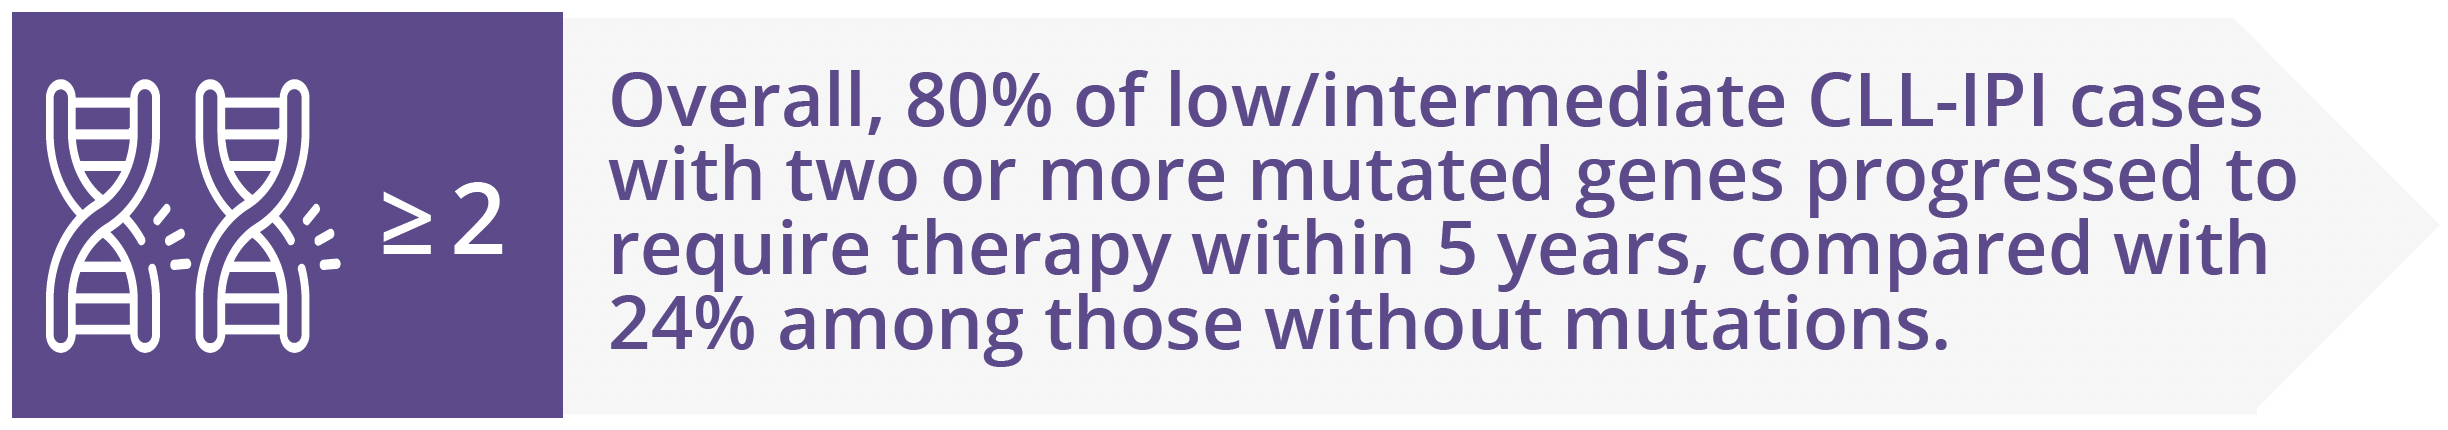 Proportion of low or intermediate CLL-IPI cases with two or more mutated genes that progress to require therapy within 5 years vs. those without 